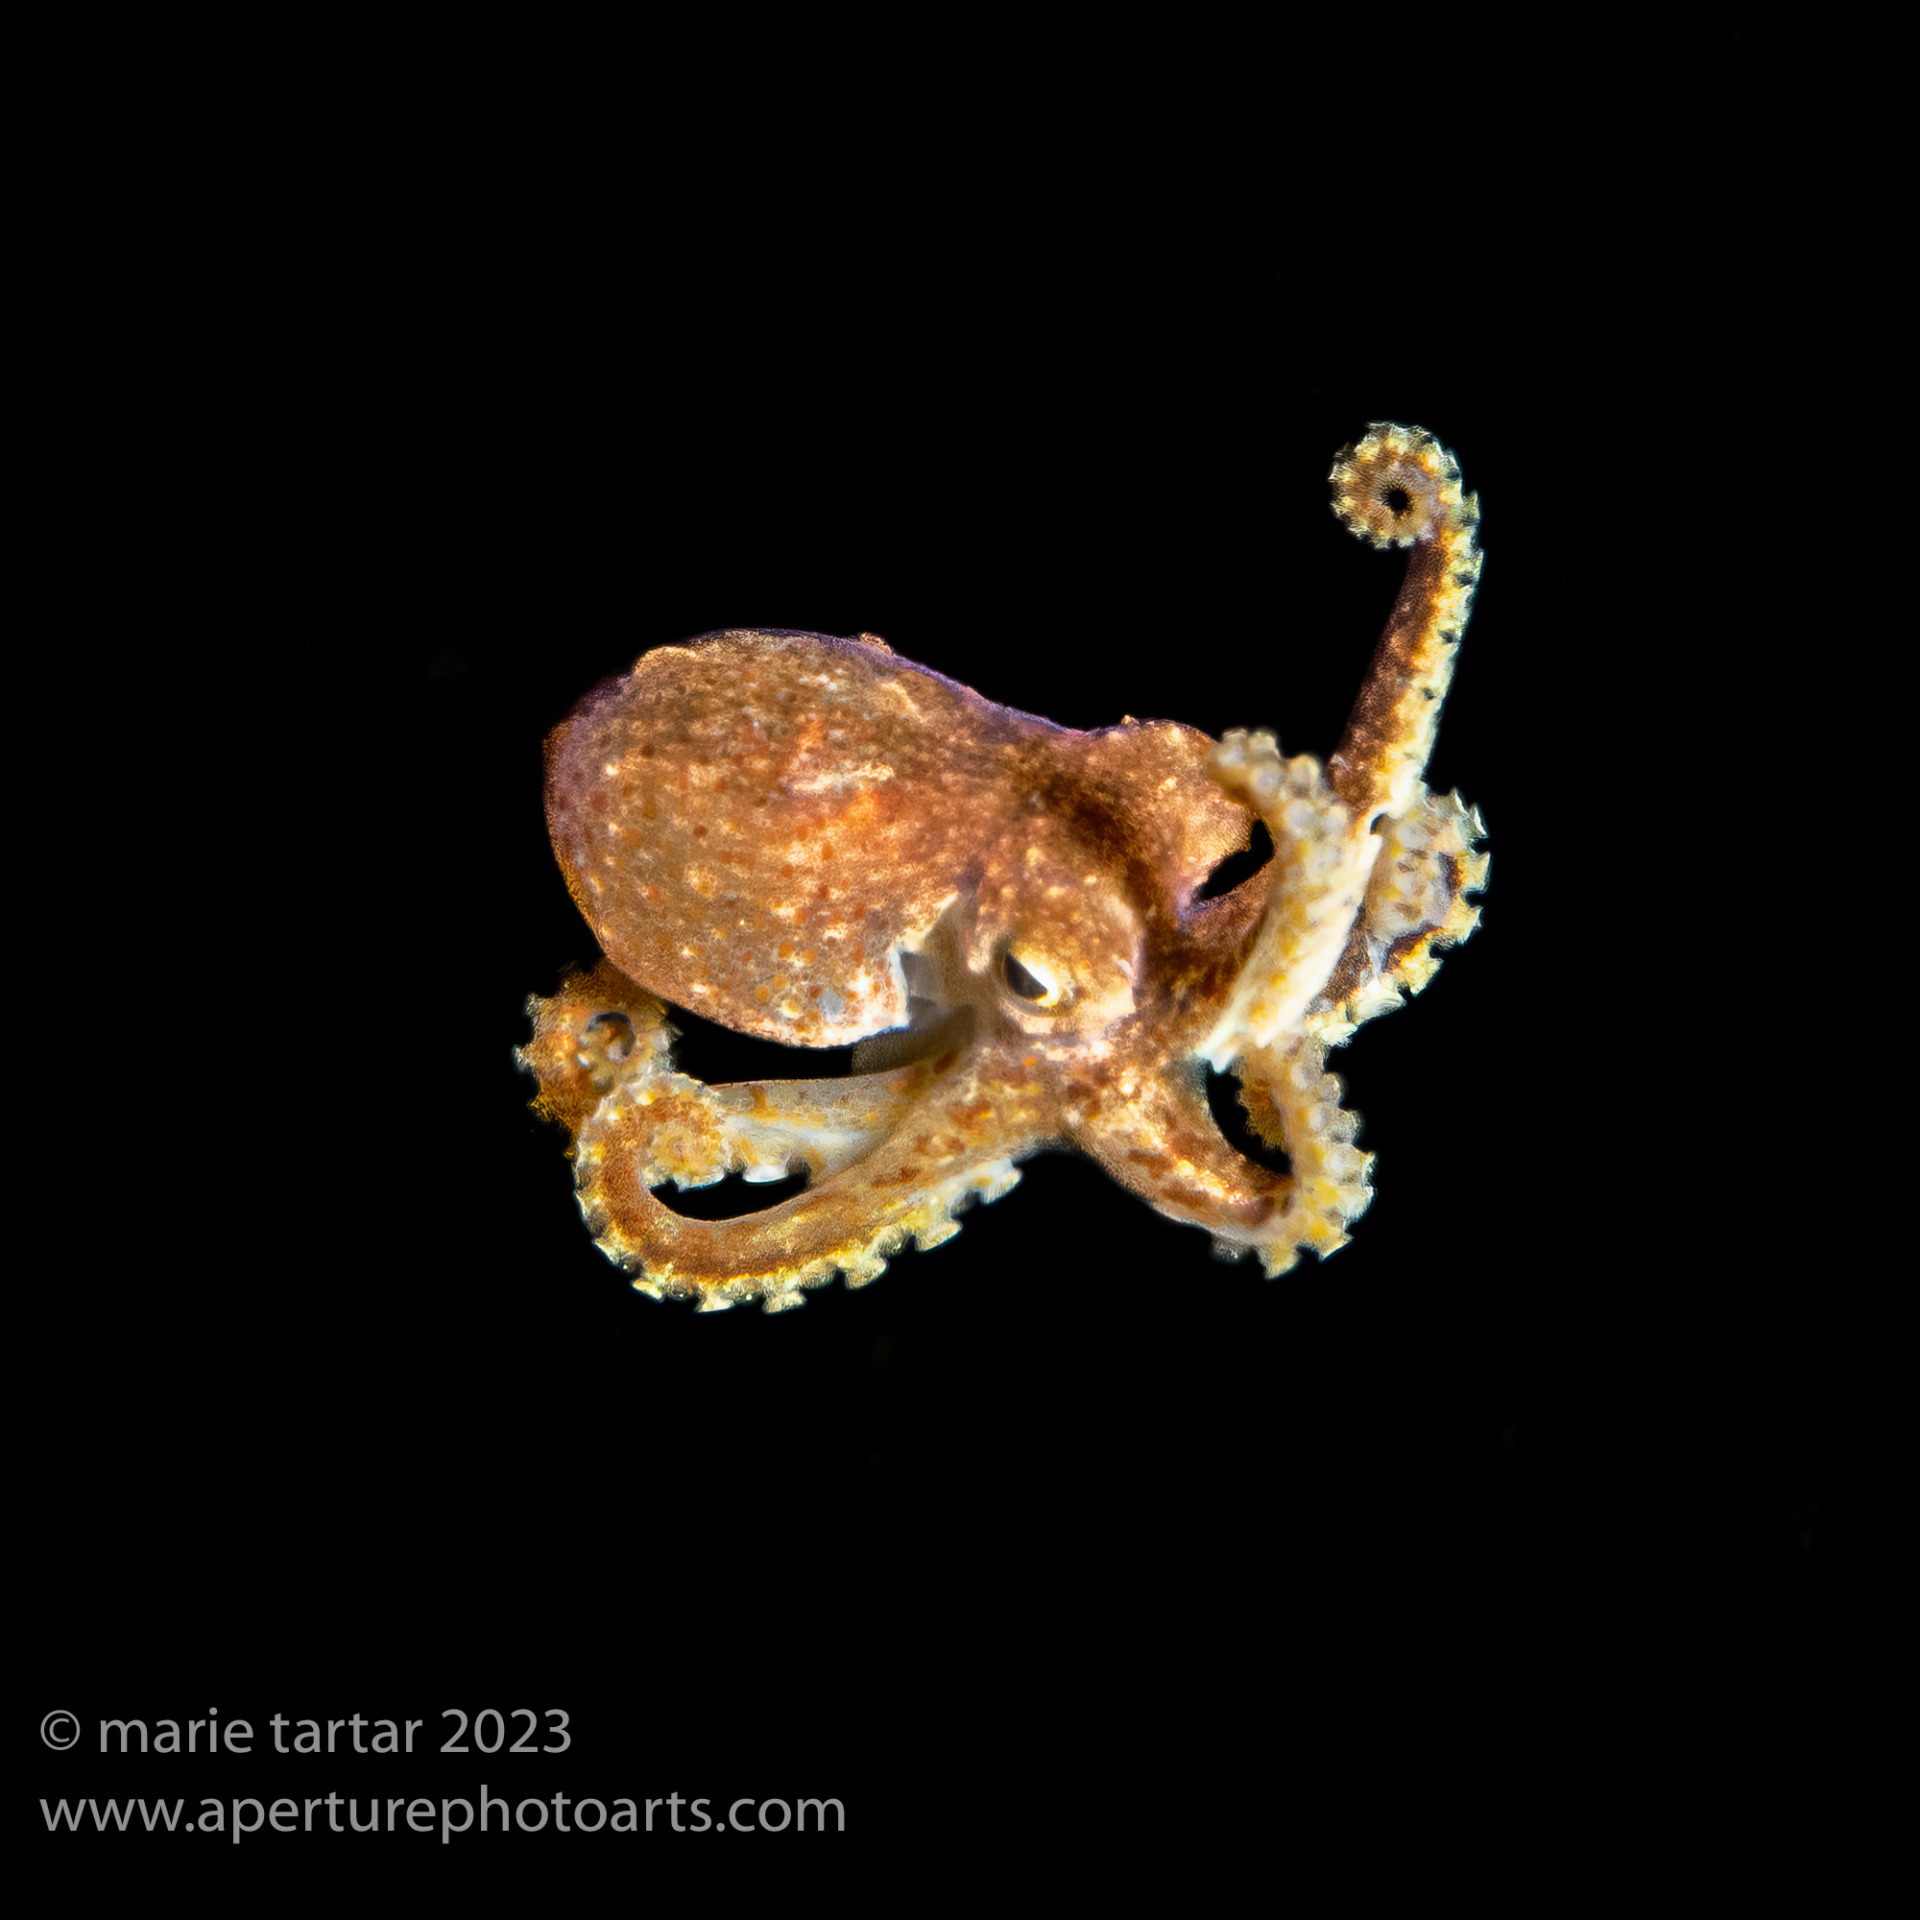 Pelagic octopus sighted on blackwater dive in Anilao, Philippines